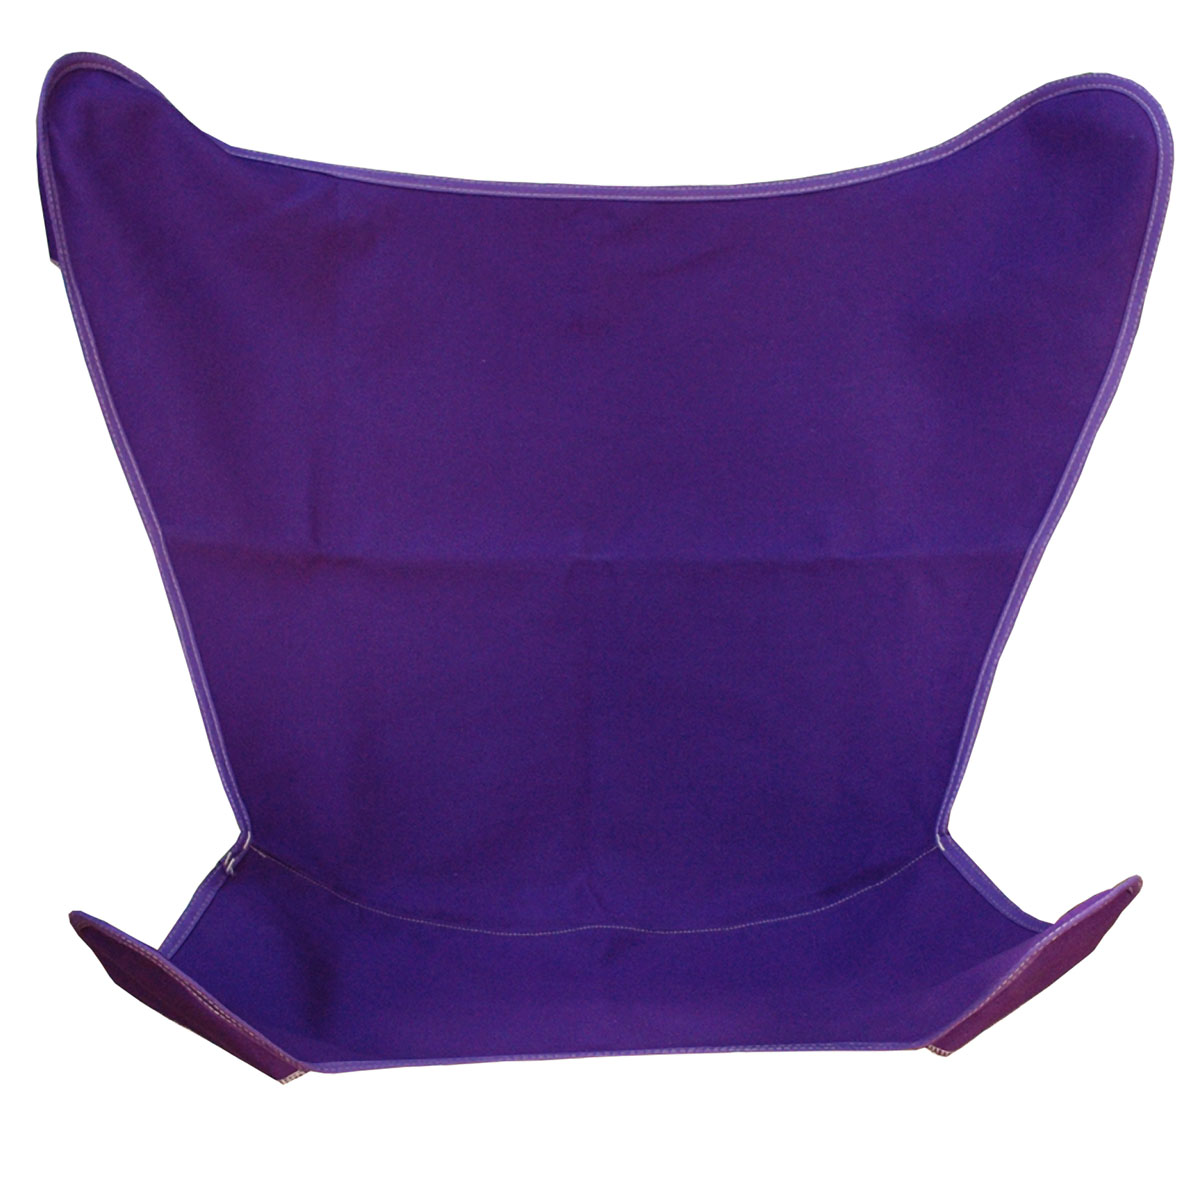 Replacement Cover for Butterfly Chair - Purple